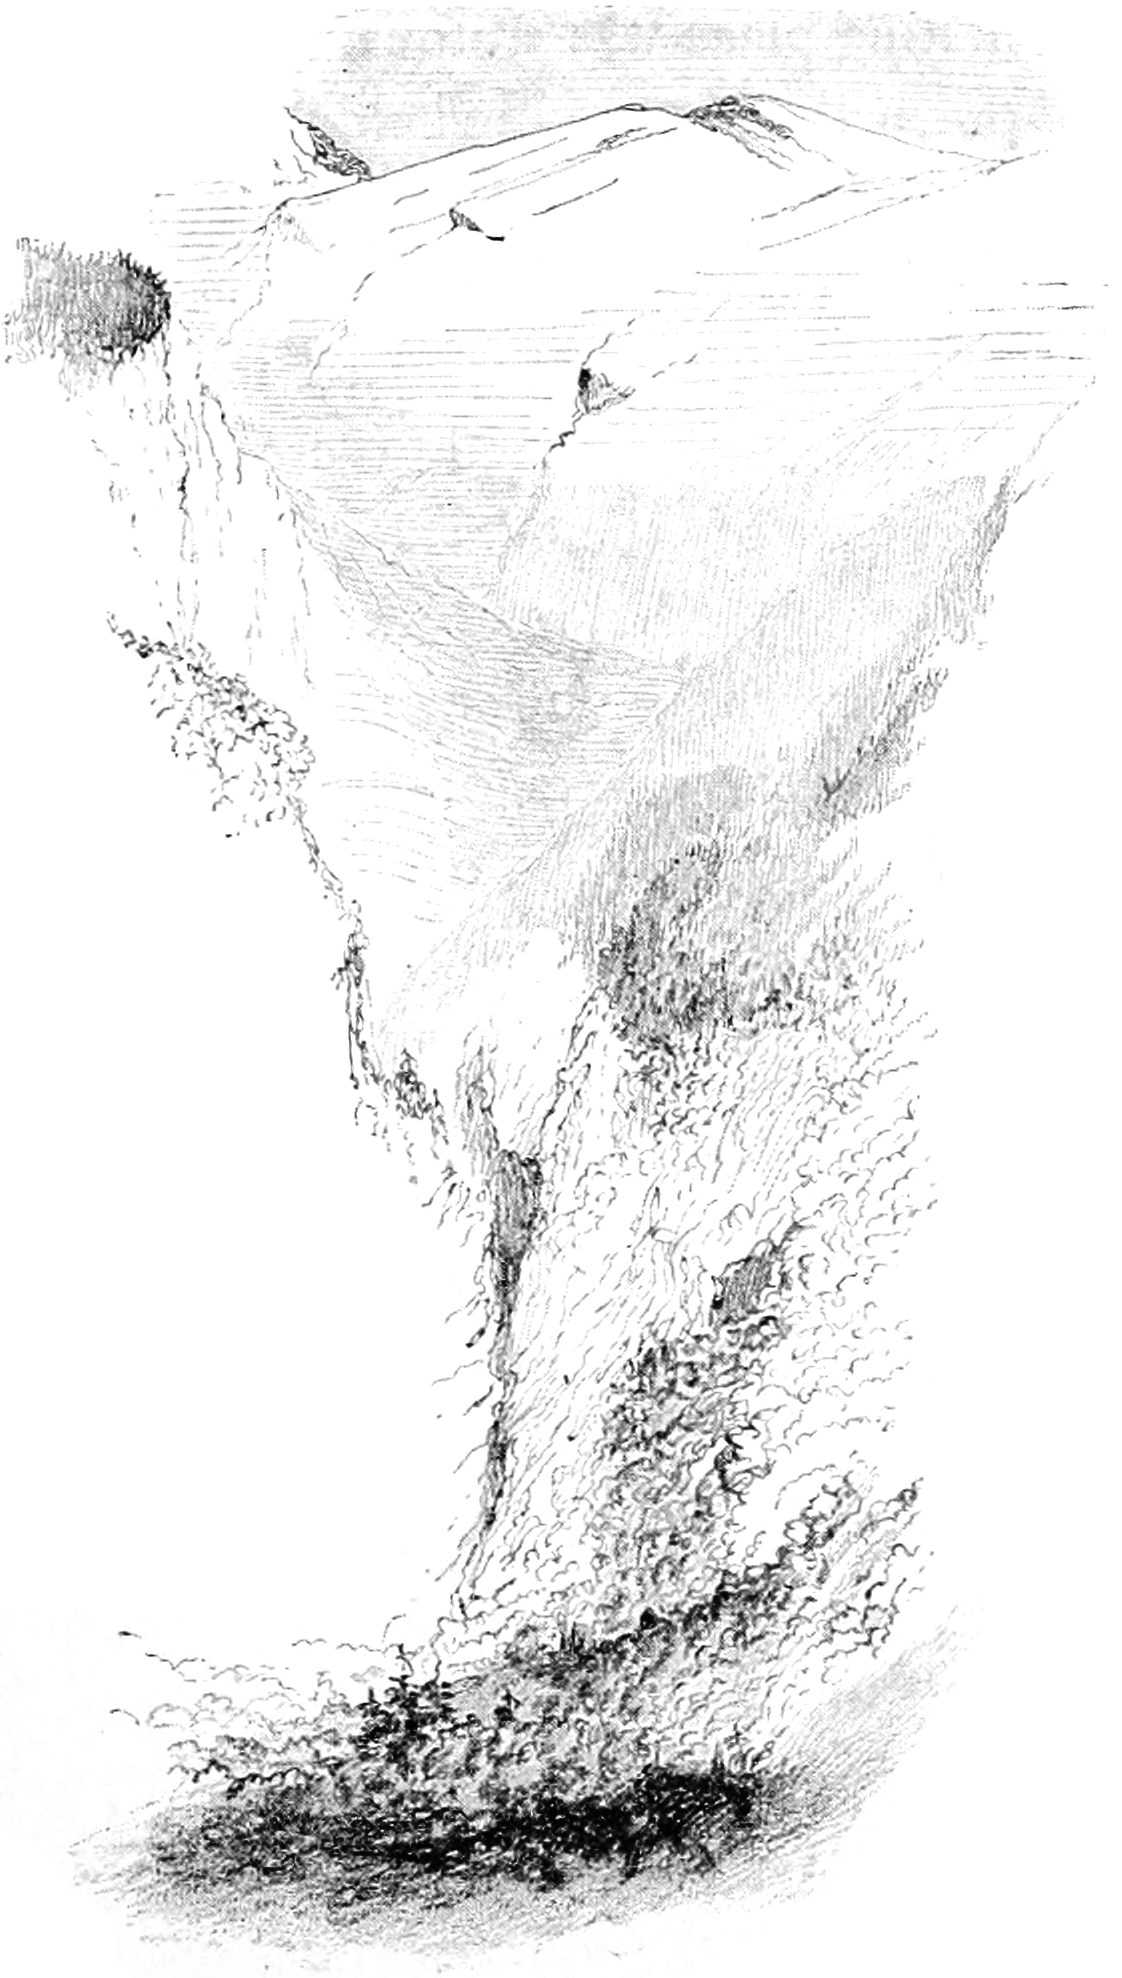 Sketch of a ravine with mountains in the distance and to each side, and forests below.